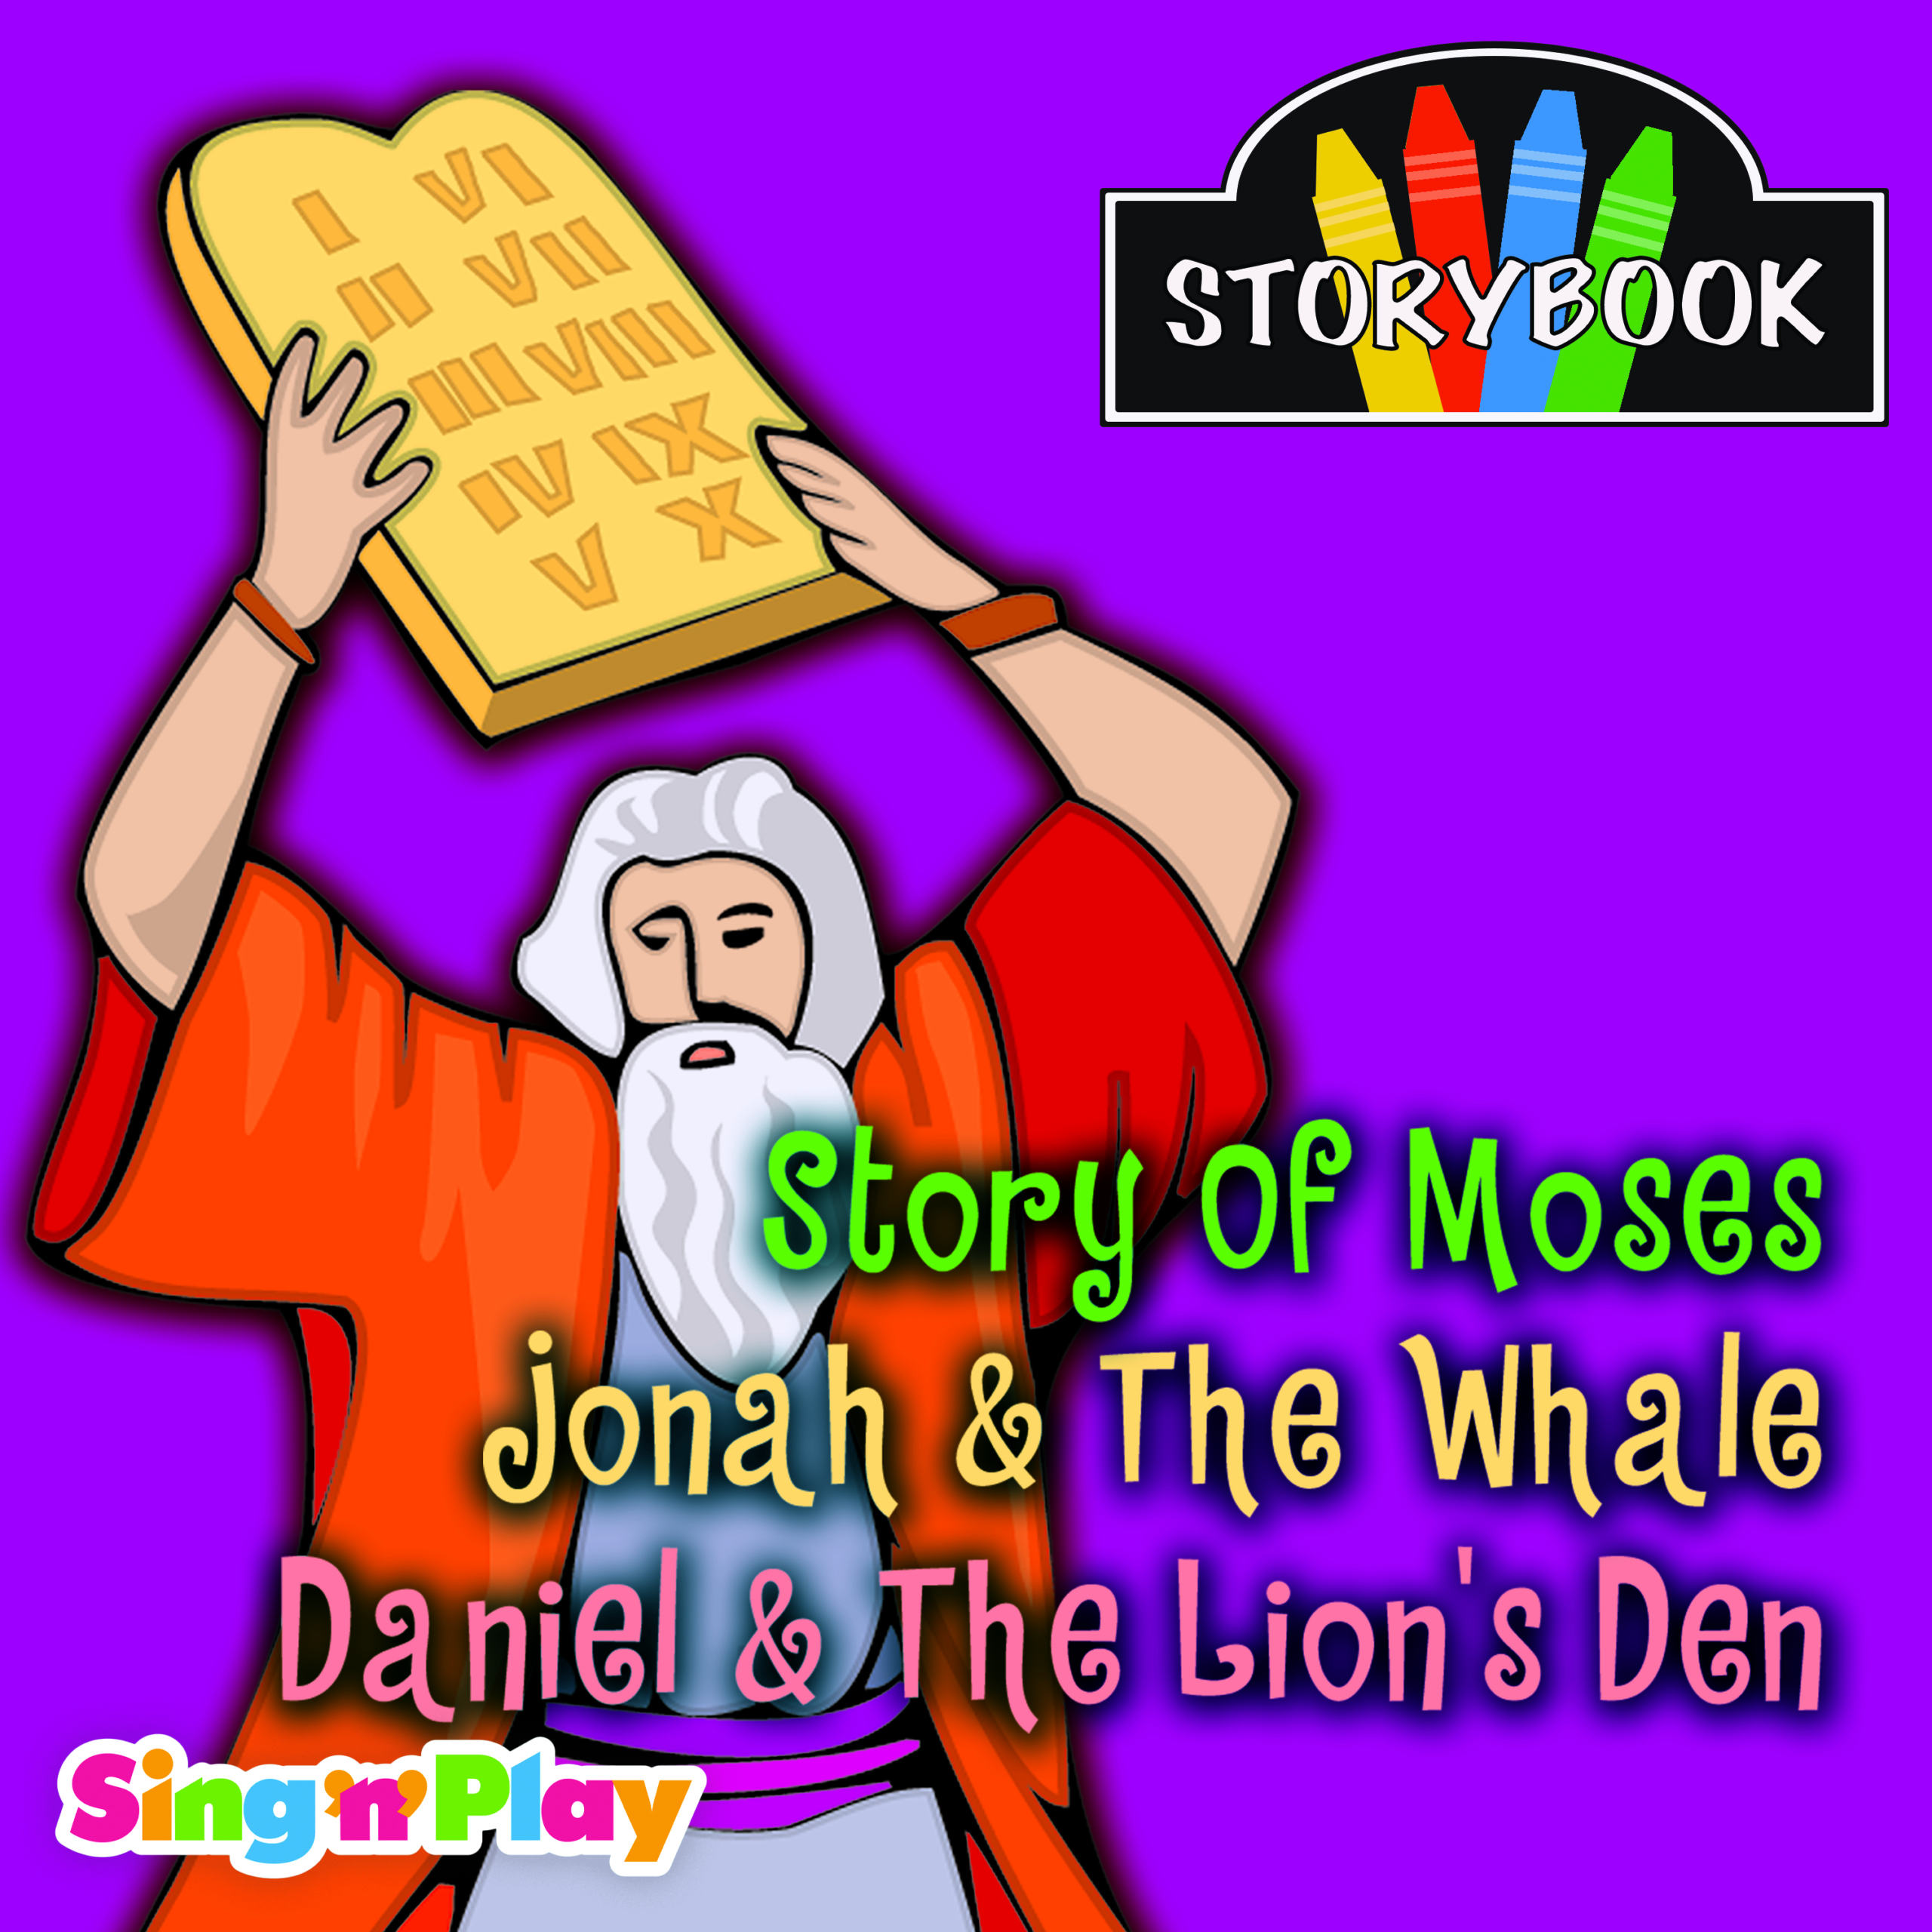 Storybook Storytellers: Story of Moses, Jonah & The Whale, Daniel & the Lion's Den